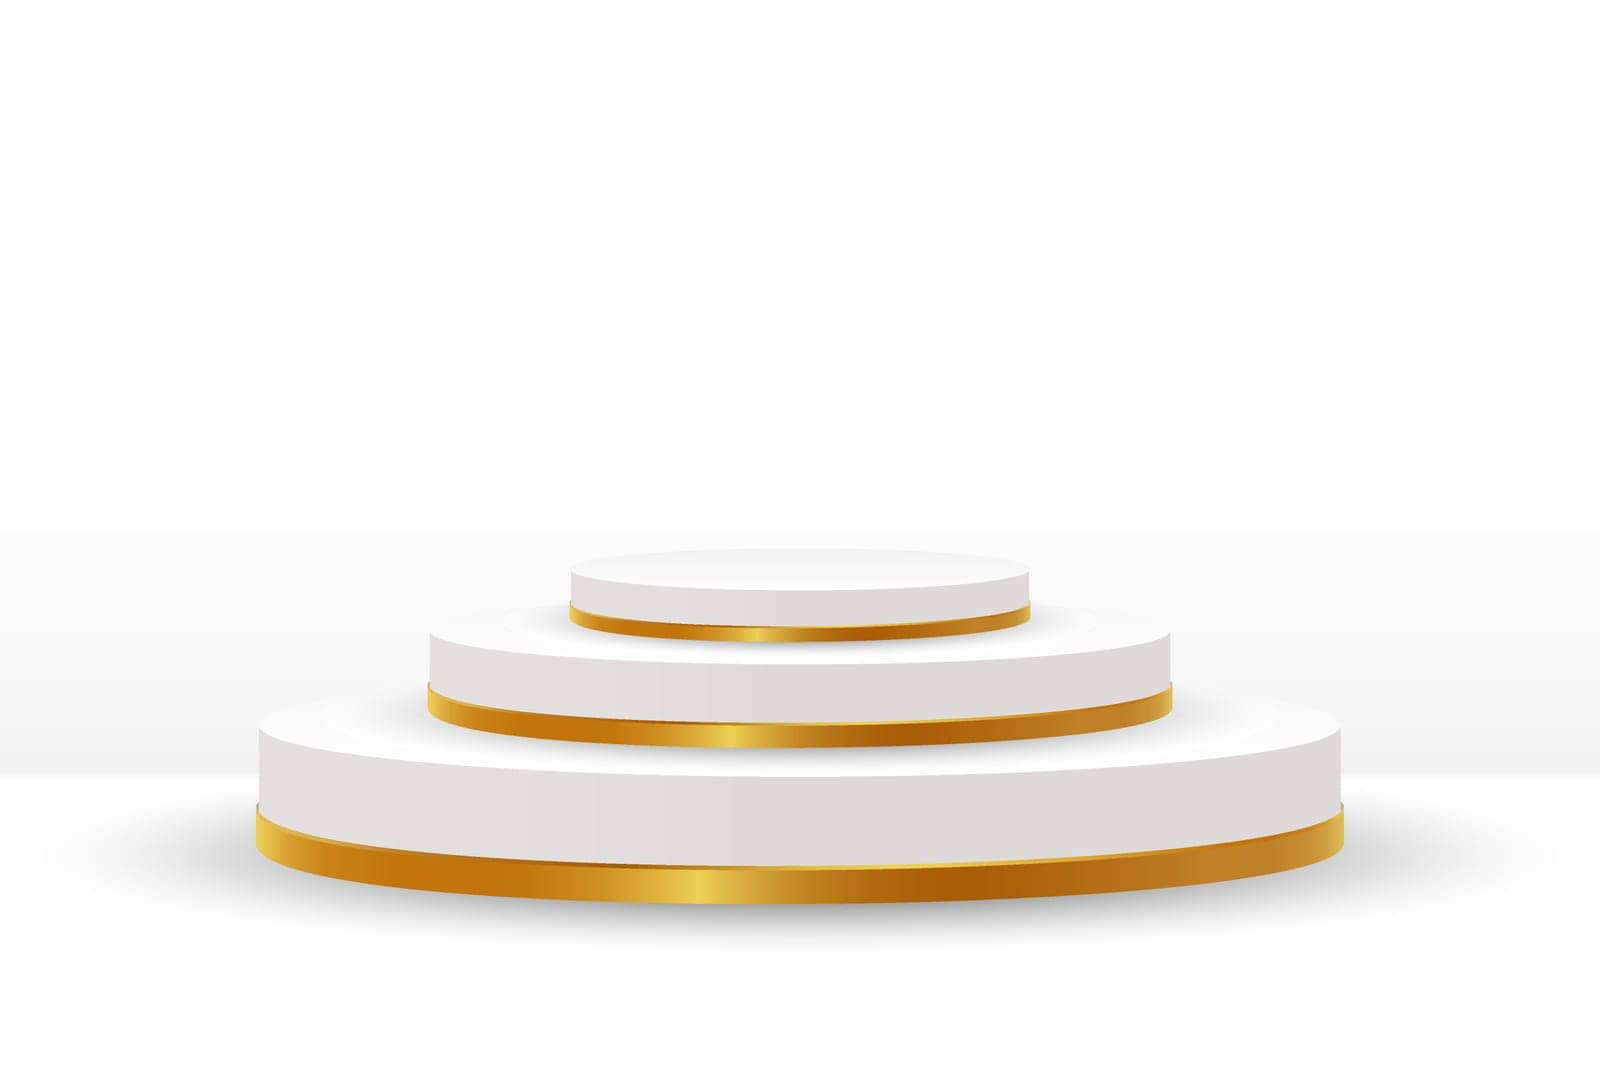 White podium with gold trim on a white background. 3d illustration by VS1959